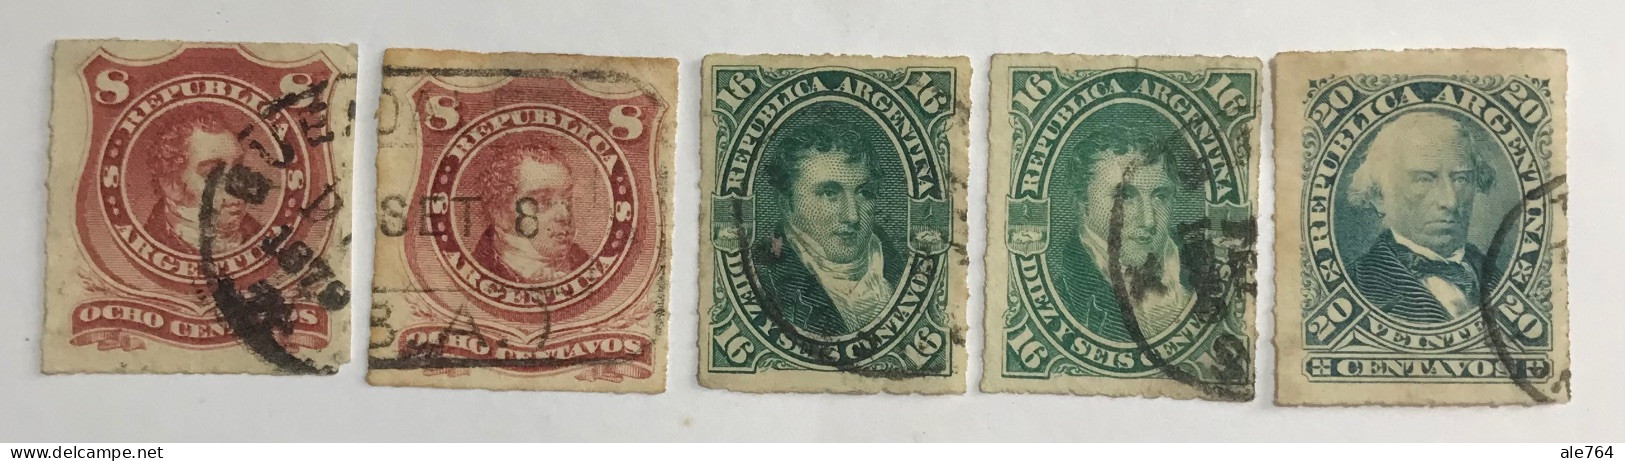 Argentina 1876/7, Rouletted, Rivadavia, Belgrano, Velez Sarfield, GJ 49/51, Scoot 35/7, Y 33/5, Used. - Used Stamps